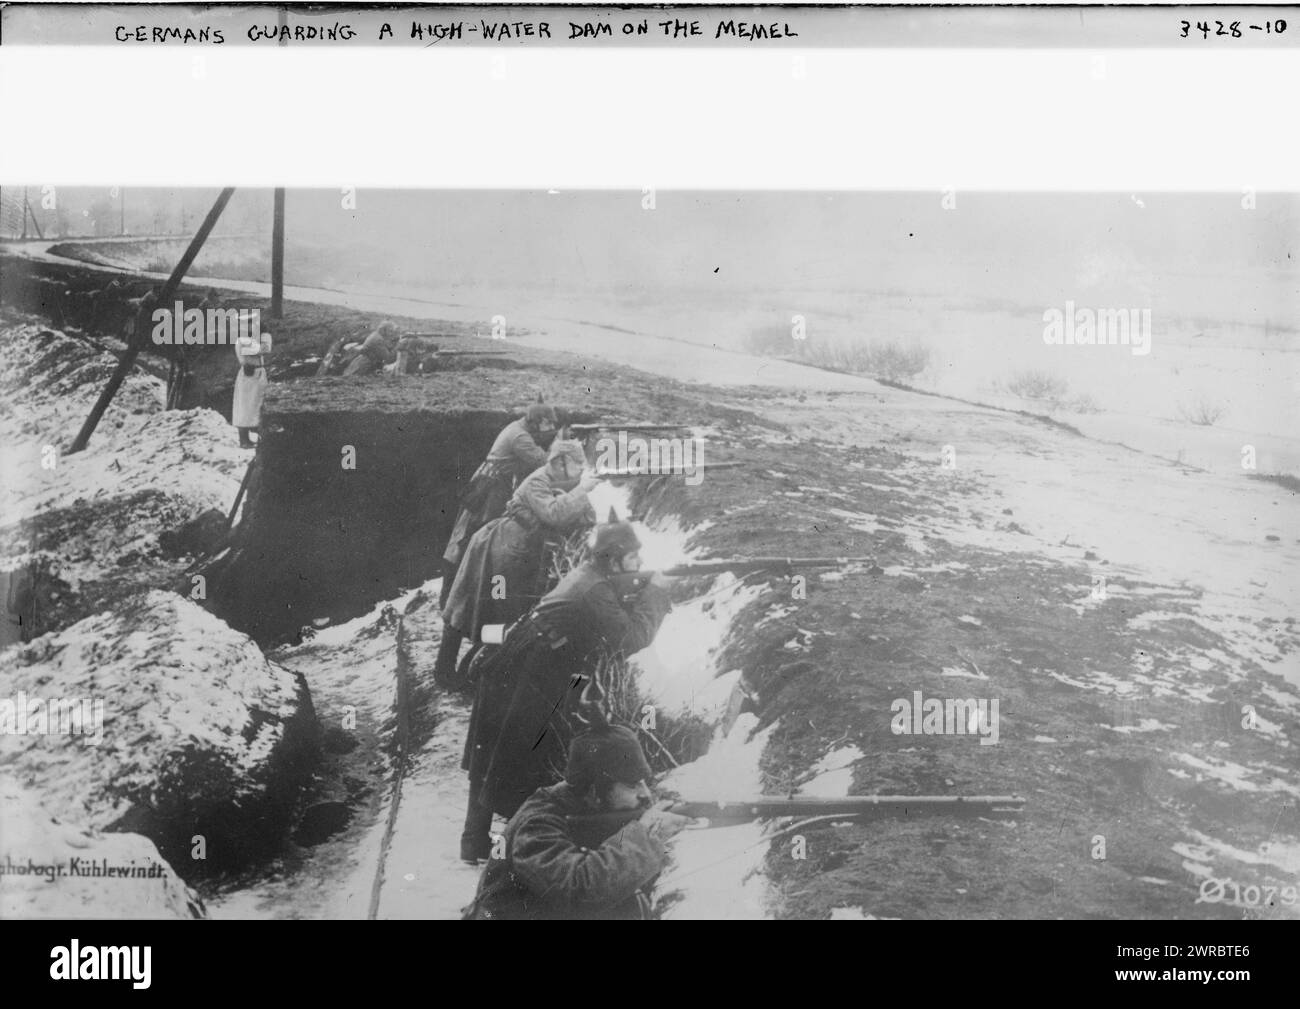 Germans guarding a high-water dam on the Memel, Photograph shows German soldiers guarding a dam on the Memel river in eastern Europe, during World War I., between ca. 1910 and ca. 1915, World War, 1914-1918, Glass negatives, 1 negative: glass Stock Photo